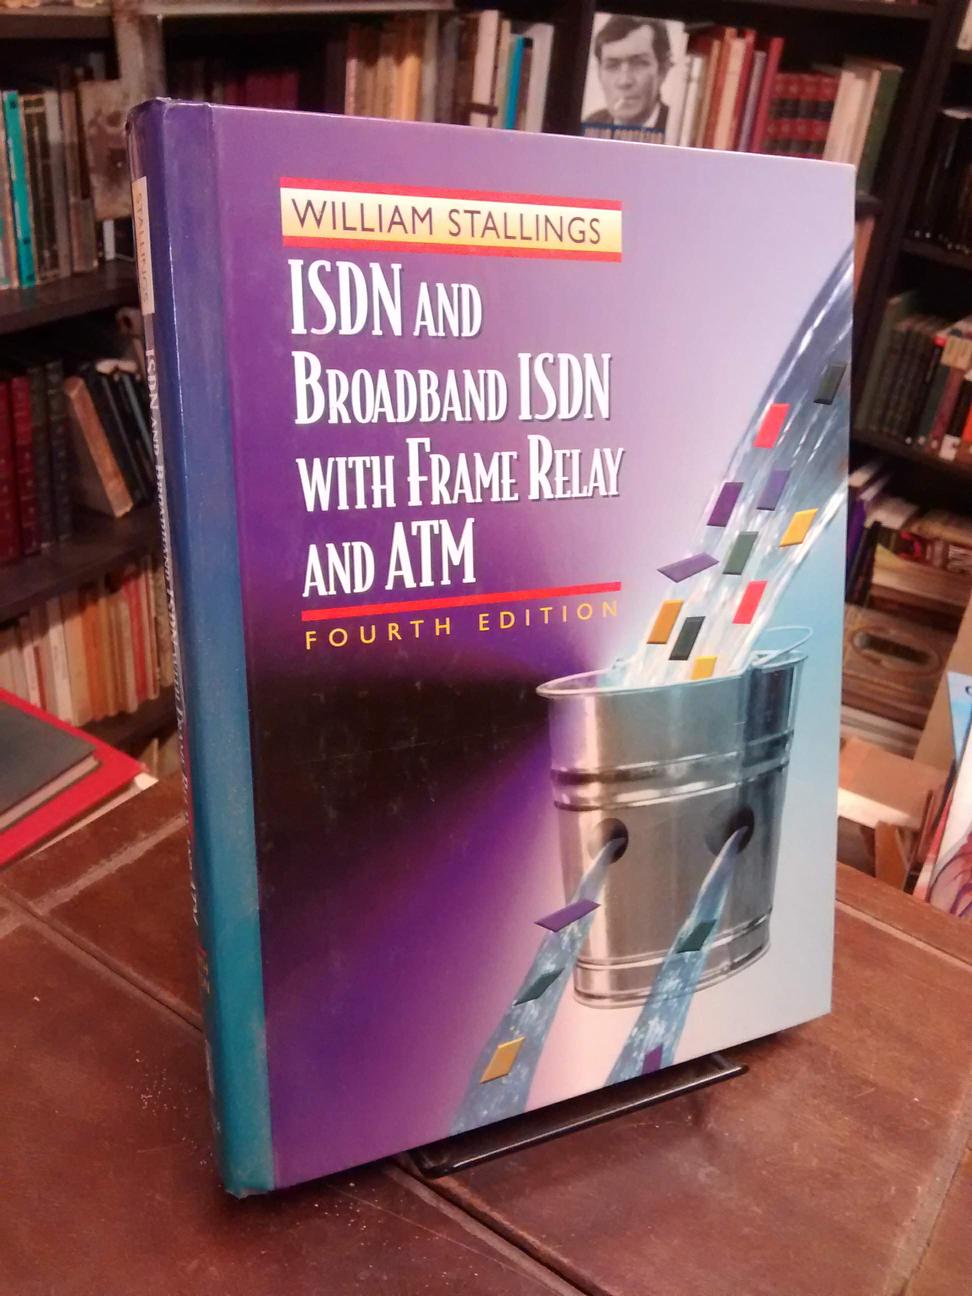 ISDN and Broadband ISDN with Frame Relay and ATM (4th ed.) - William Stallings